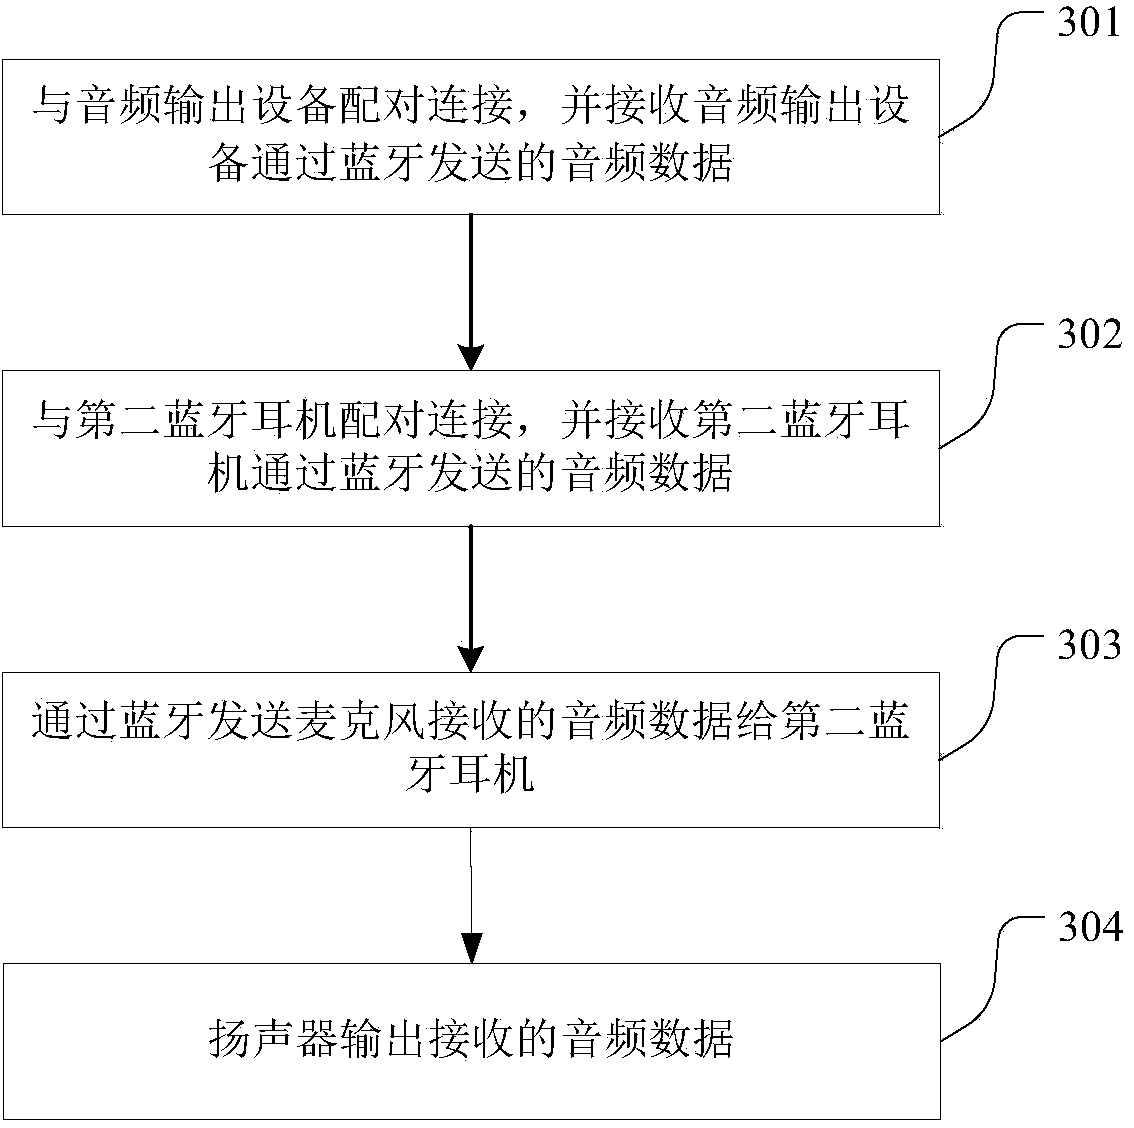 Bluetooth headset capable of sharing audios and control method thereof